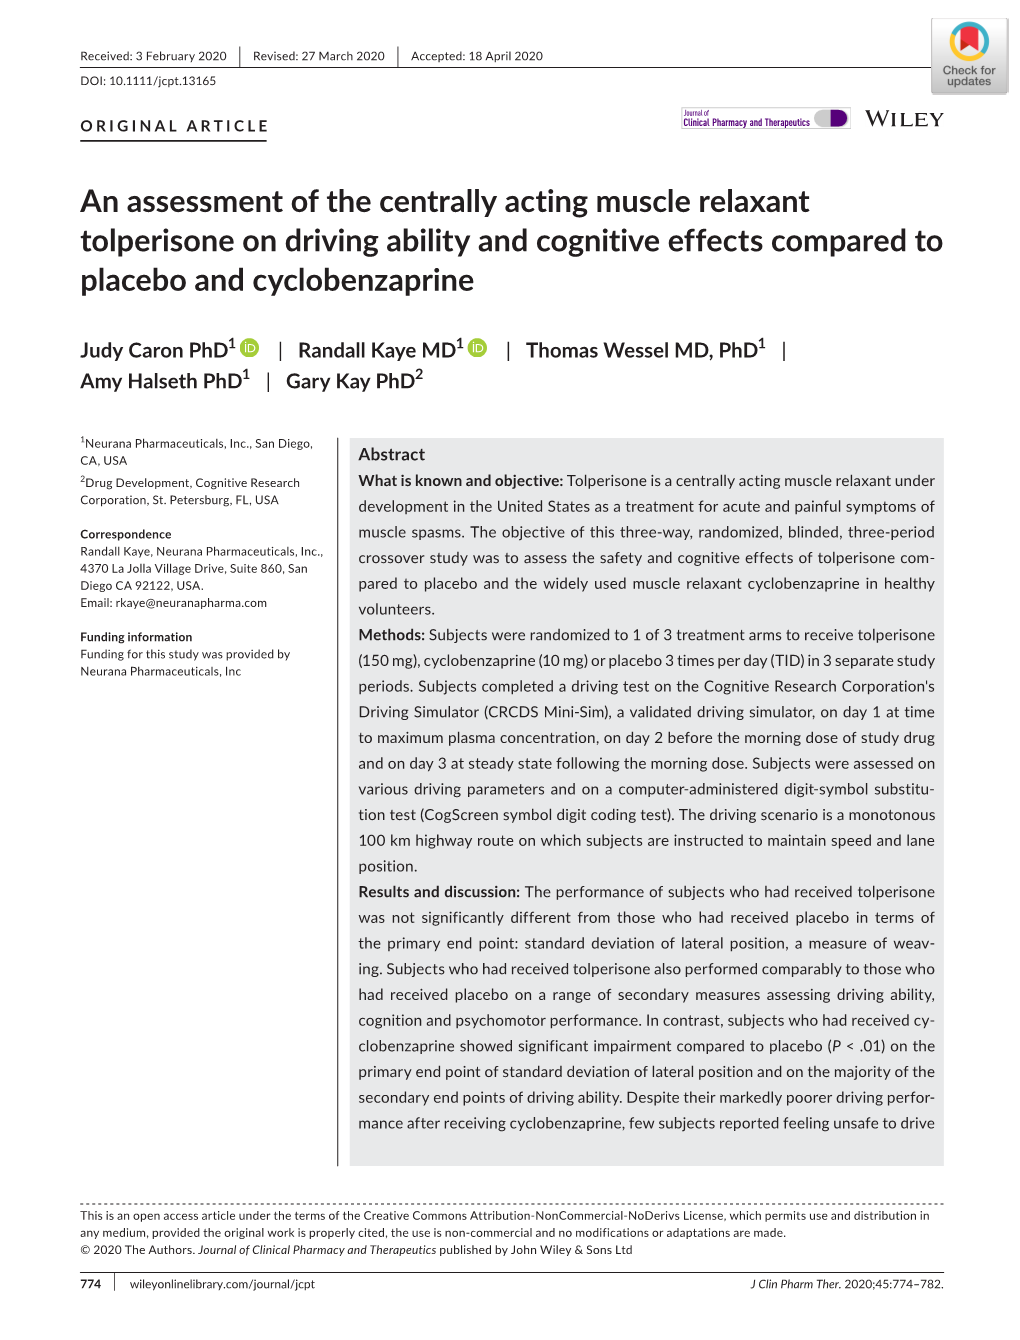 An Assessment of the Centrally Acting Muscle Relaxant Tolperisone on Driving Ability and Cognitive Effects Compared to Placebo and Cyclobenzaprine